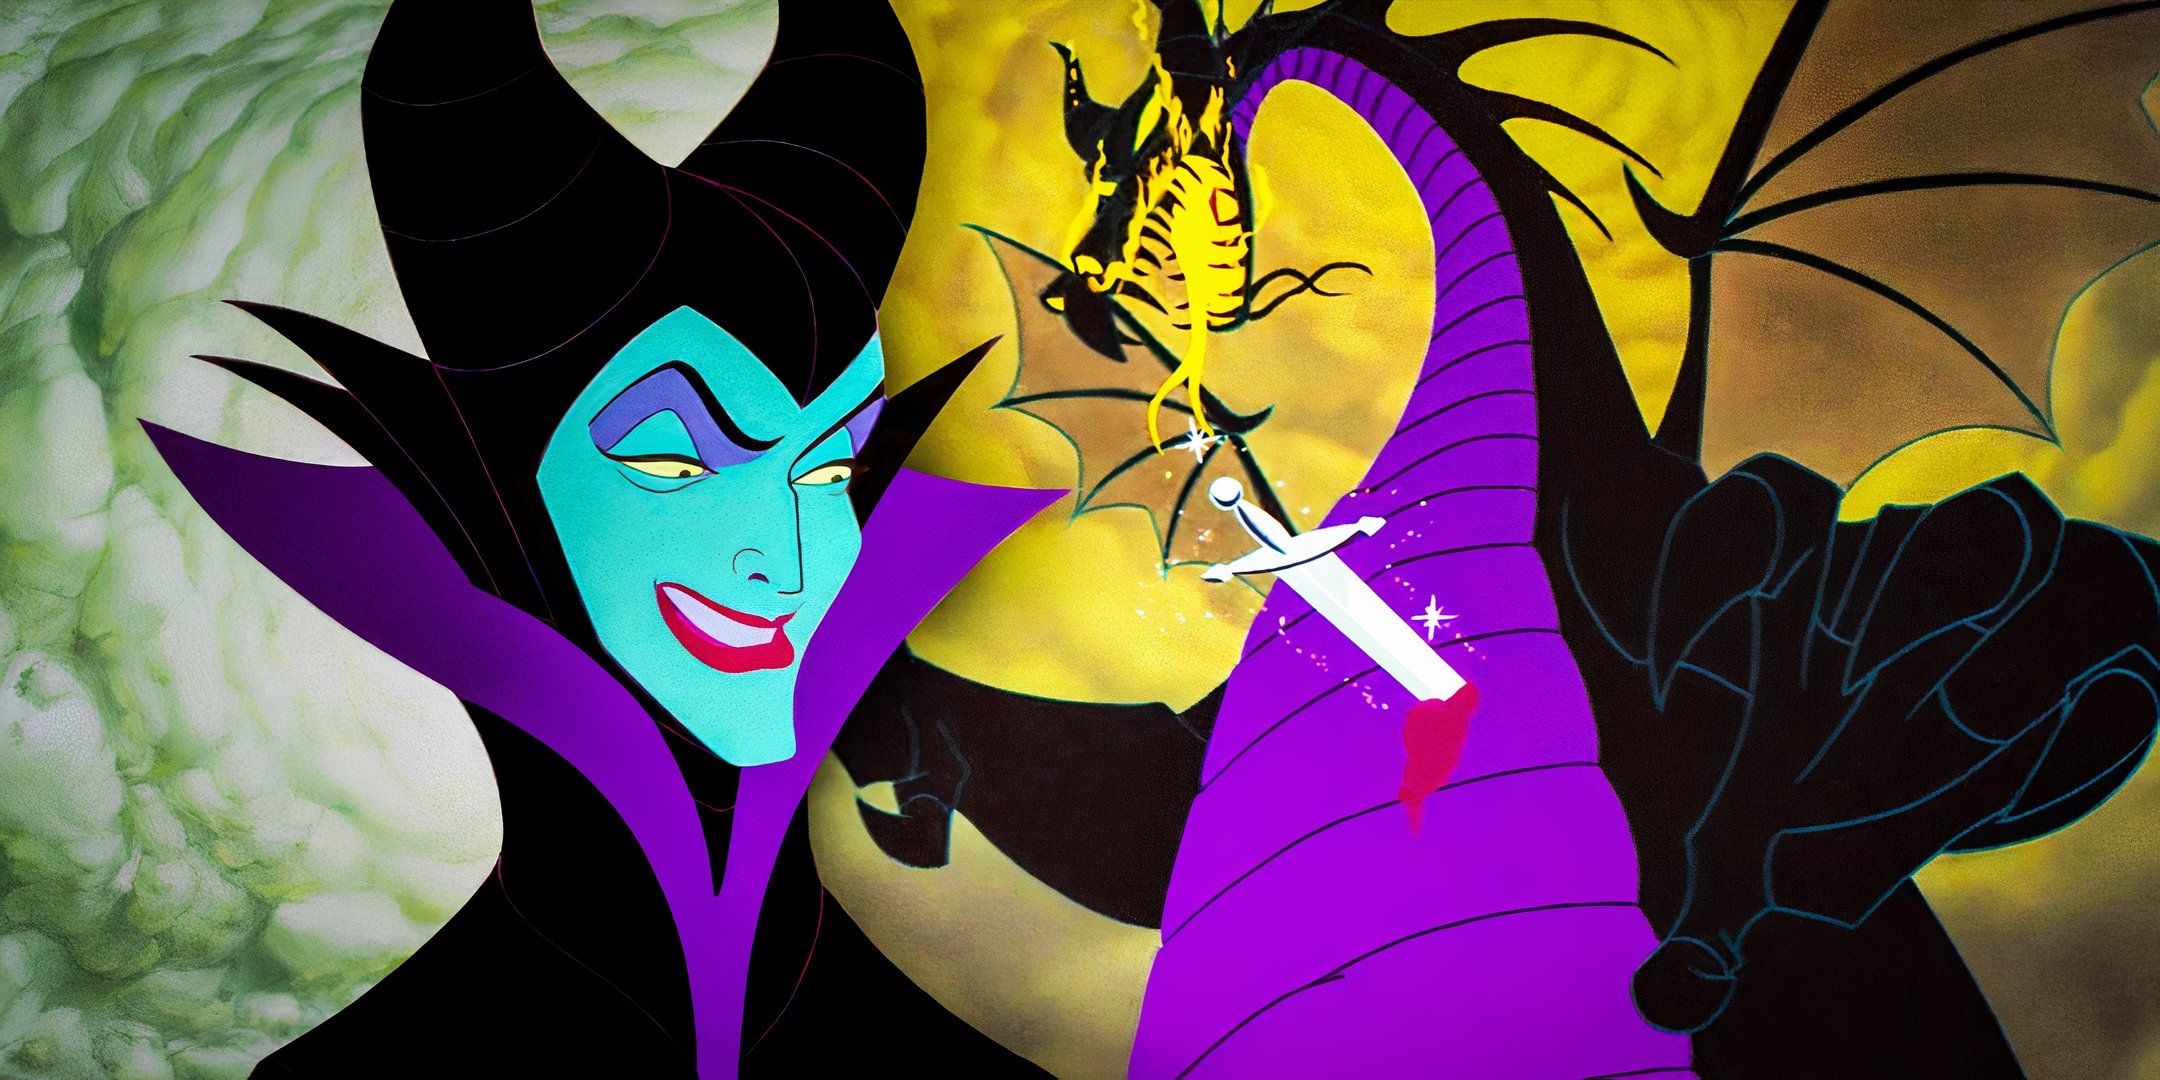 Wild Disney Theory Reveals Maleficent Survived Sleeping Beauty (& Got Way Stronger)